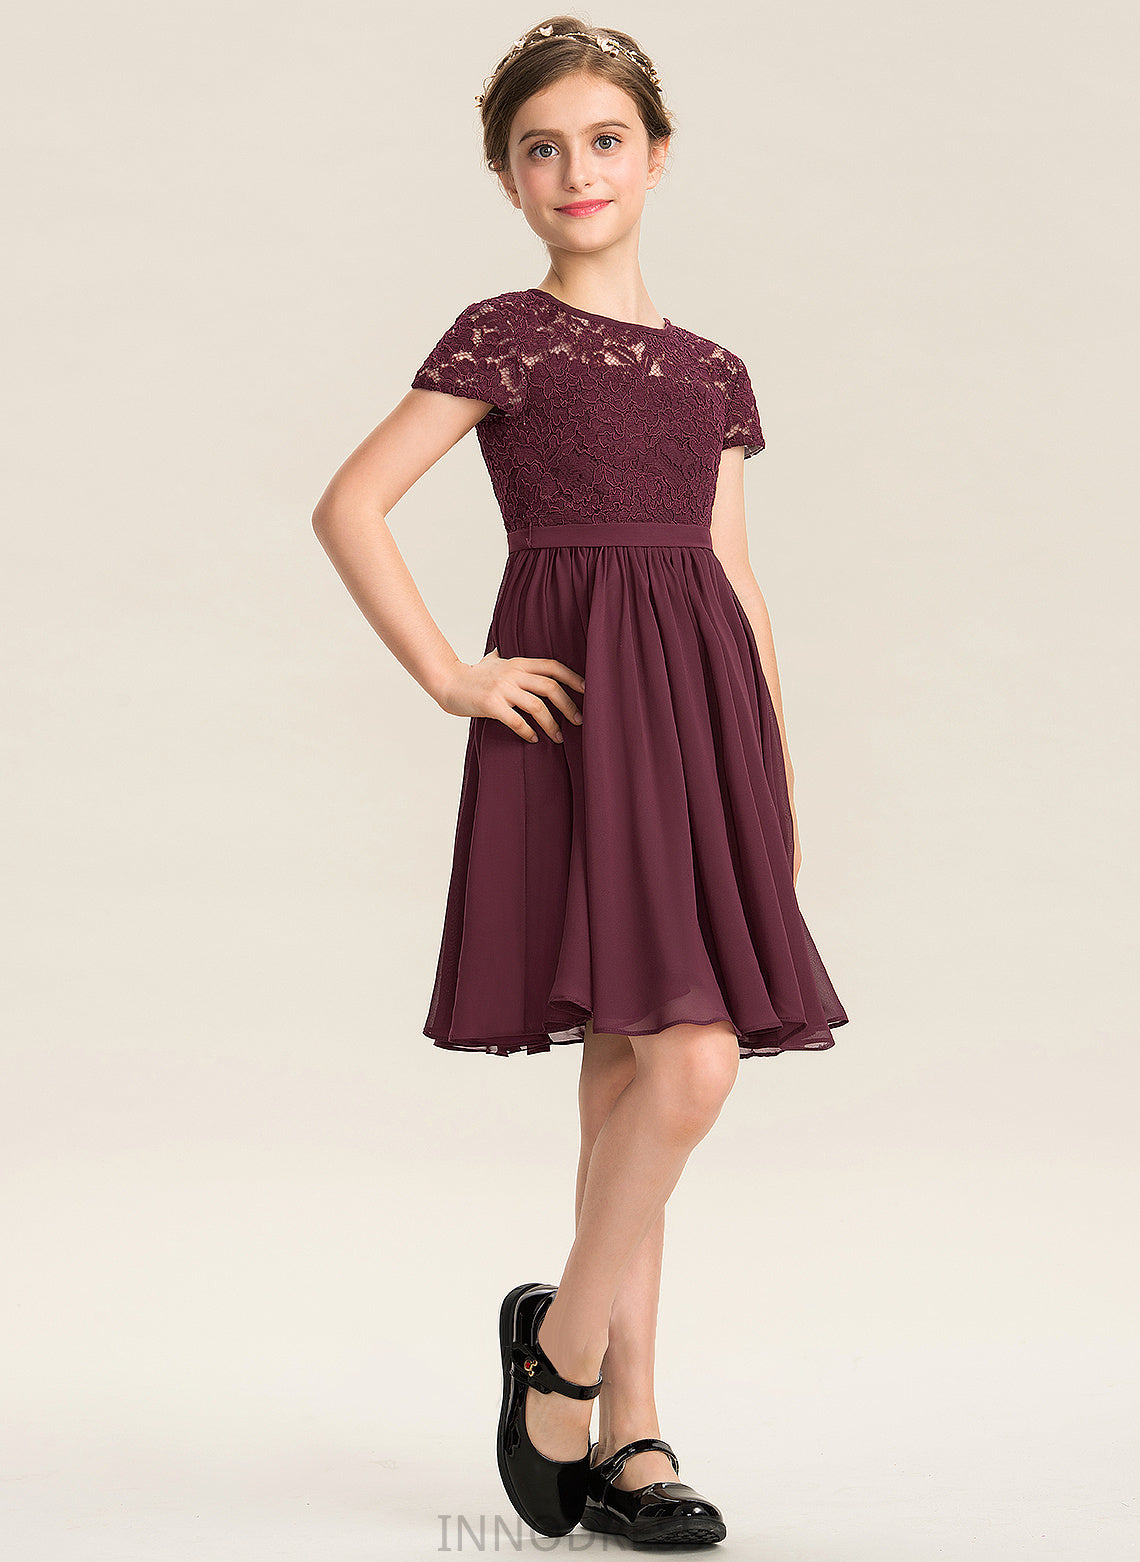 Neck Lace Scoop Knee-Length Bow(s) Cloe Junior Bridesmaid Dresses With Chiffon A-Line